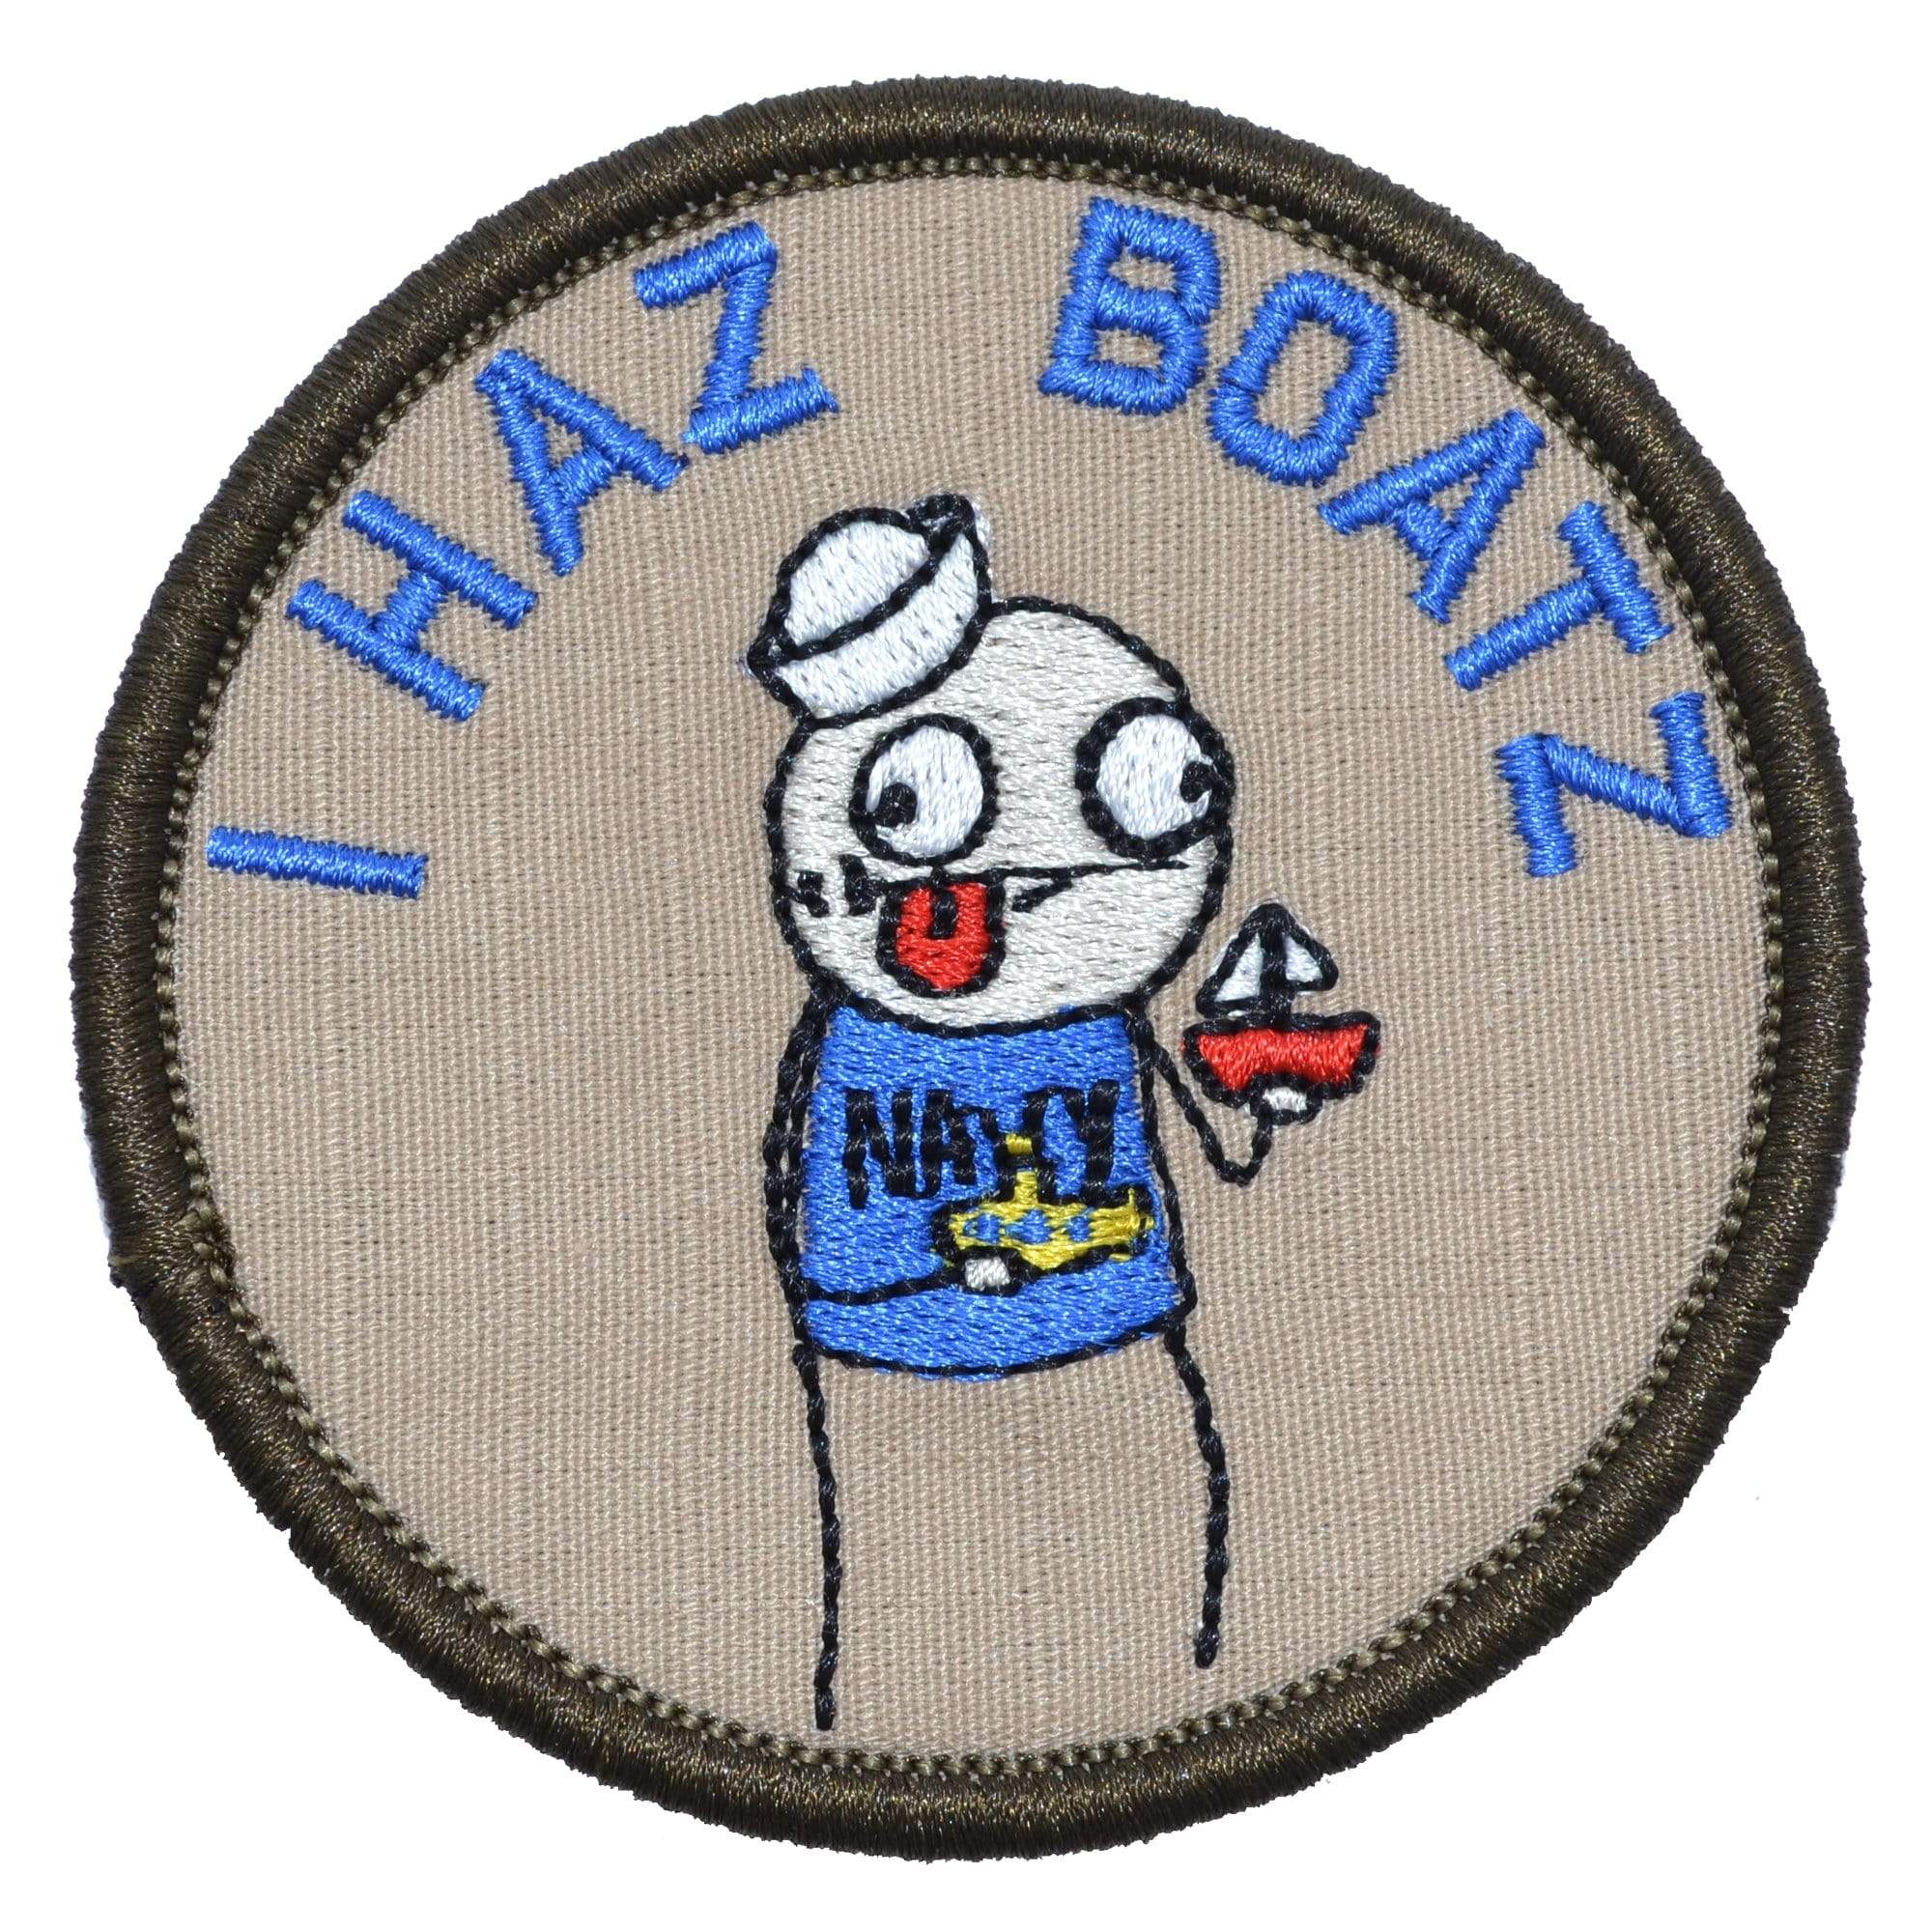 Tactical Gear Junkie Patches Sketch's World © US Navy "I Haz Boatz" - 3.5 in Round Patch